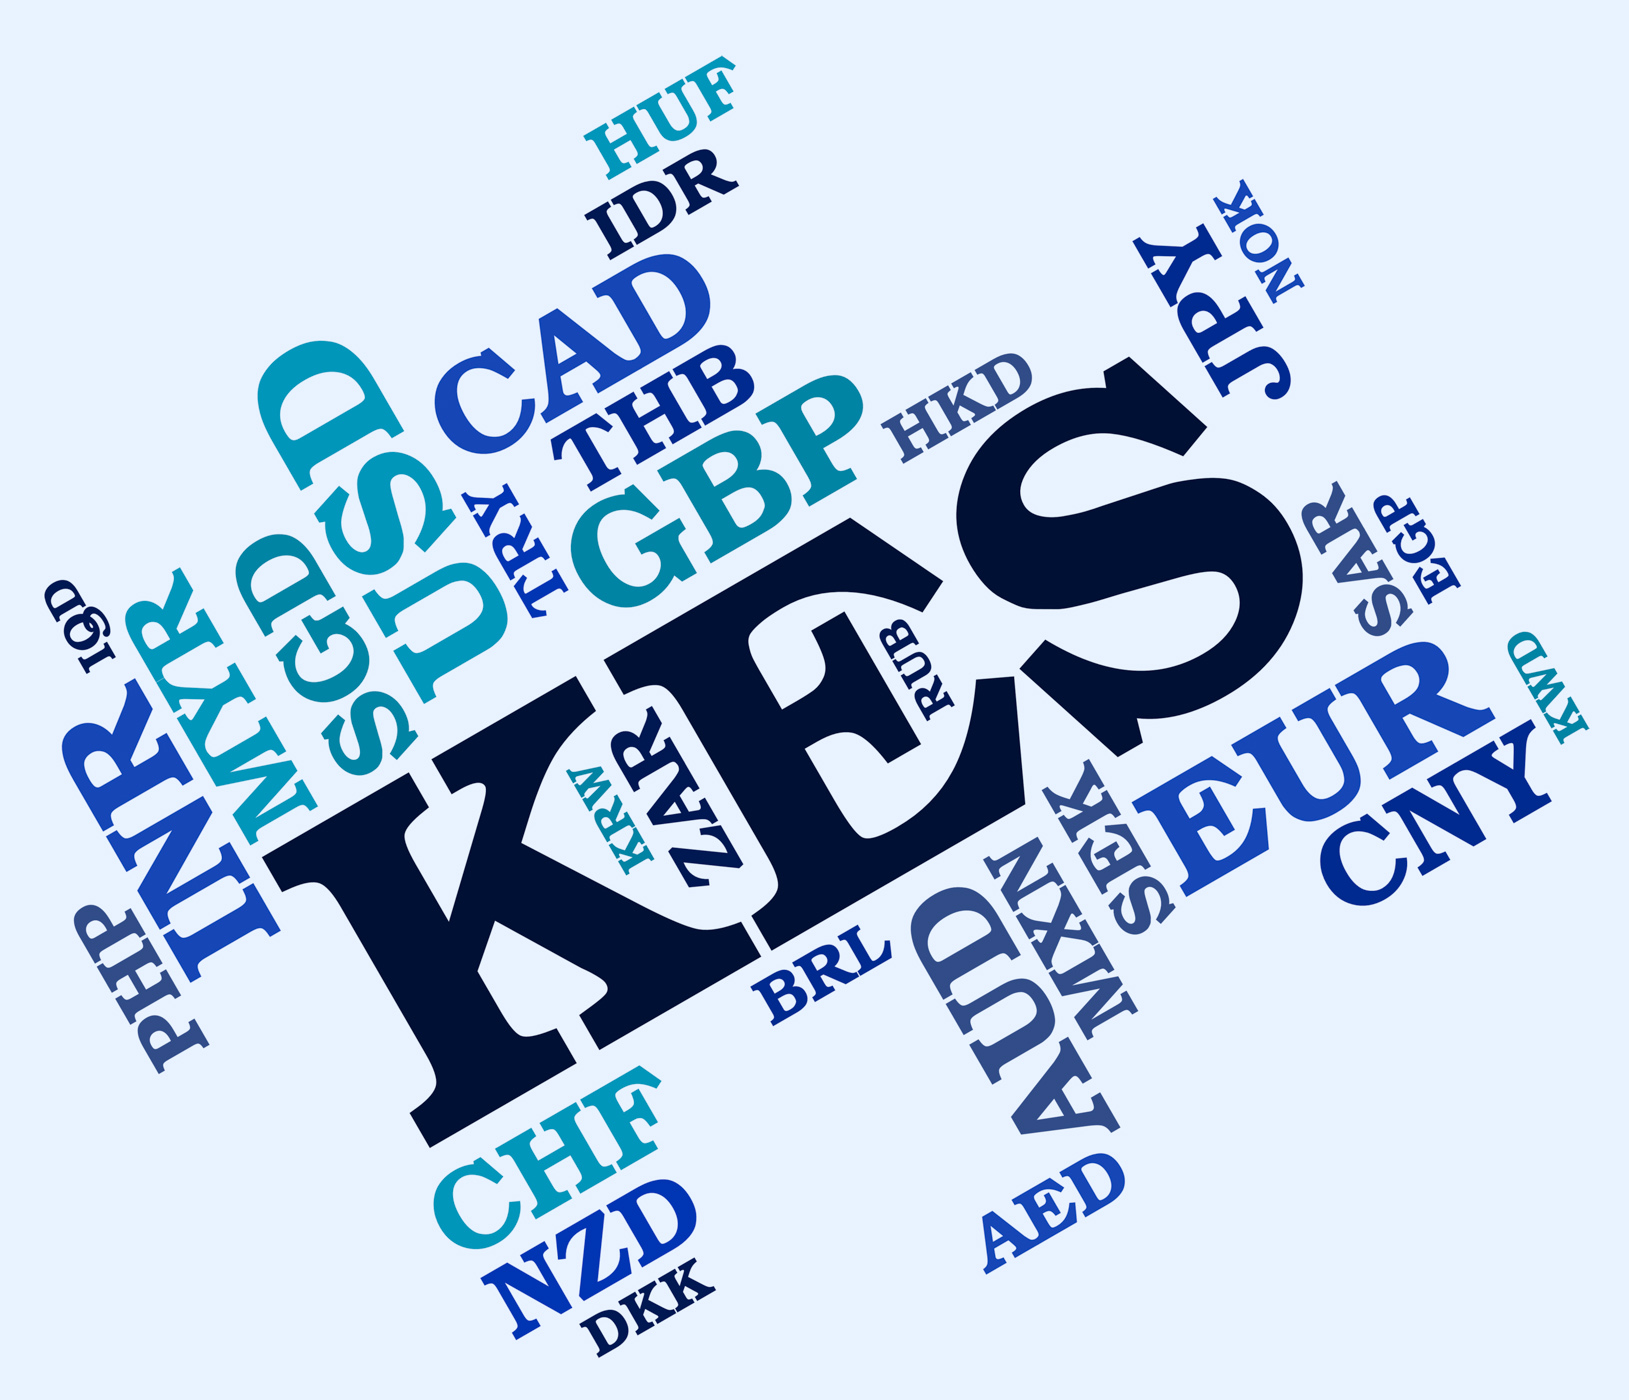 Kes Currency Shows Foreign Exchange And Banknotes, Banknote, Kenyan, Words, Wordcloud, HQ Photo